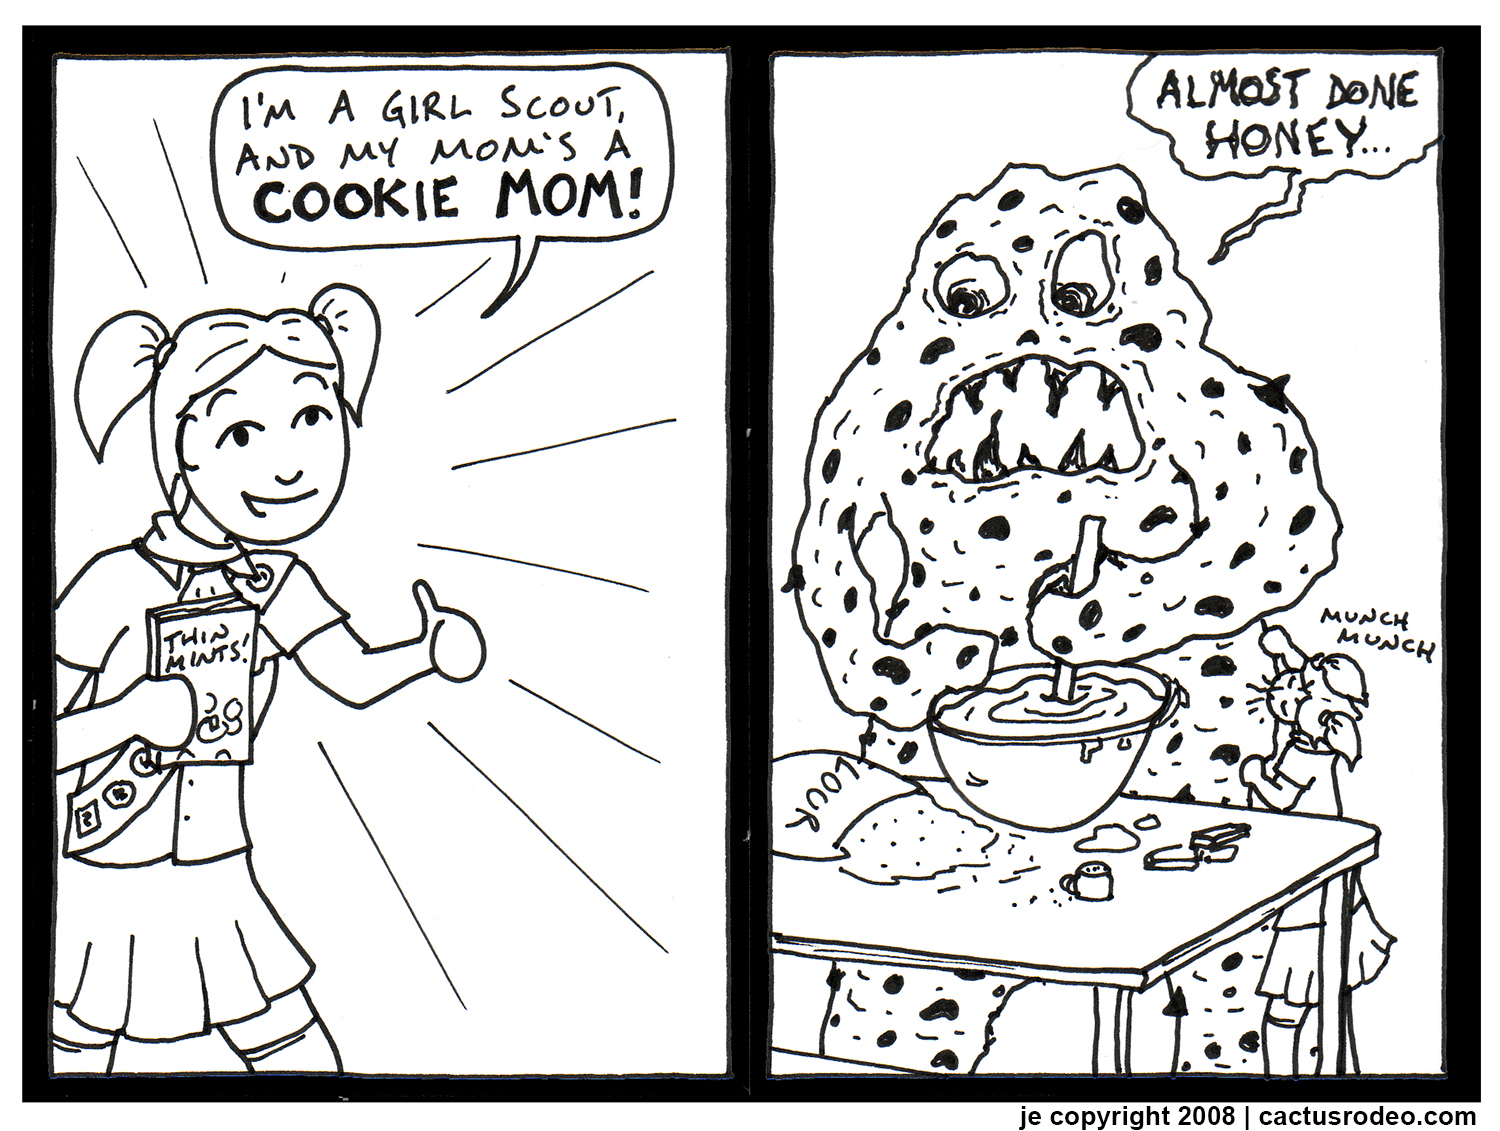 Cookie Mom